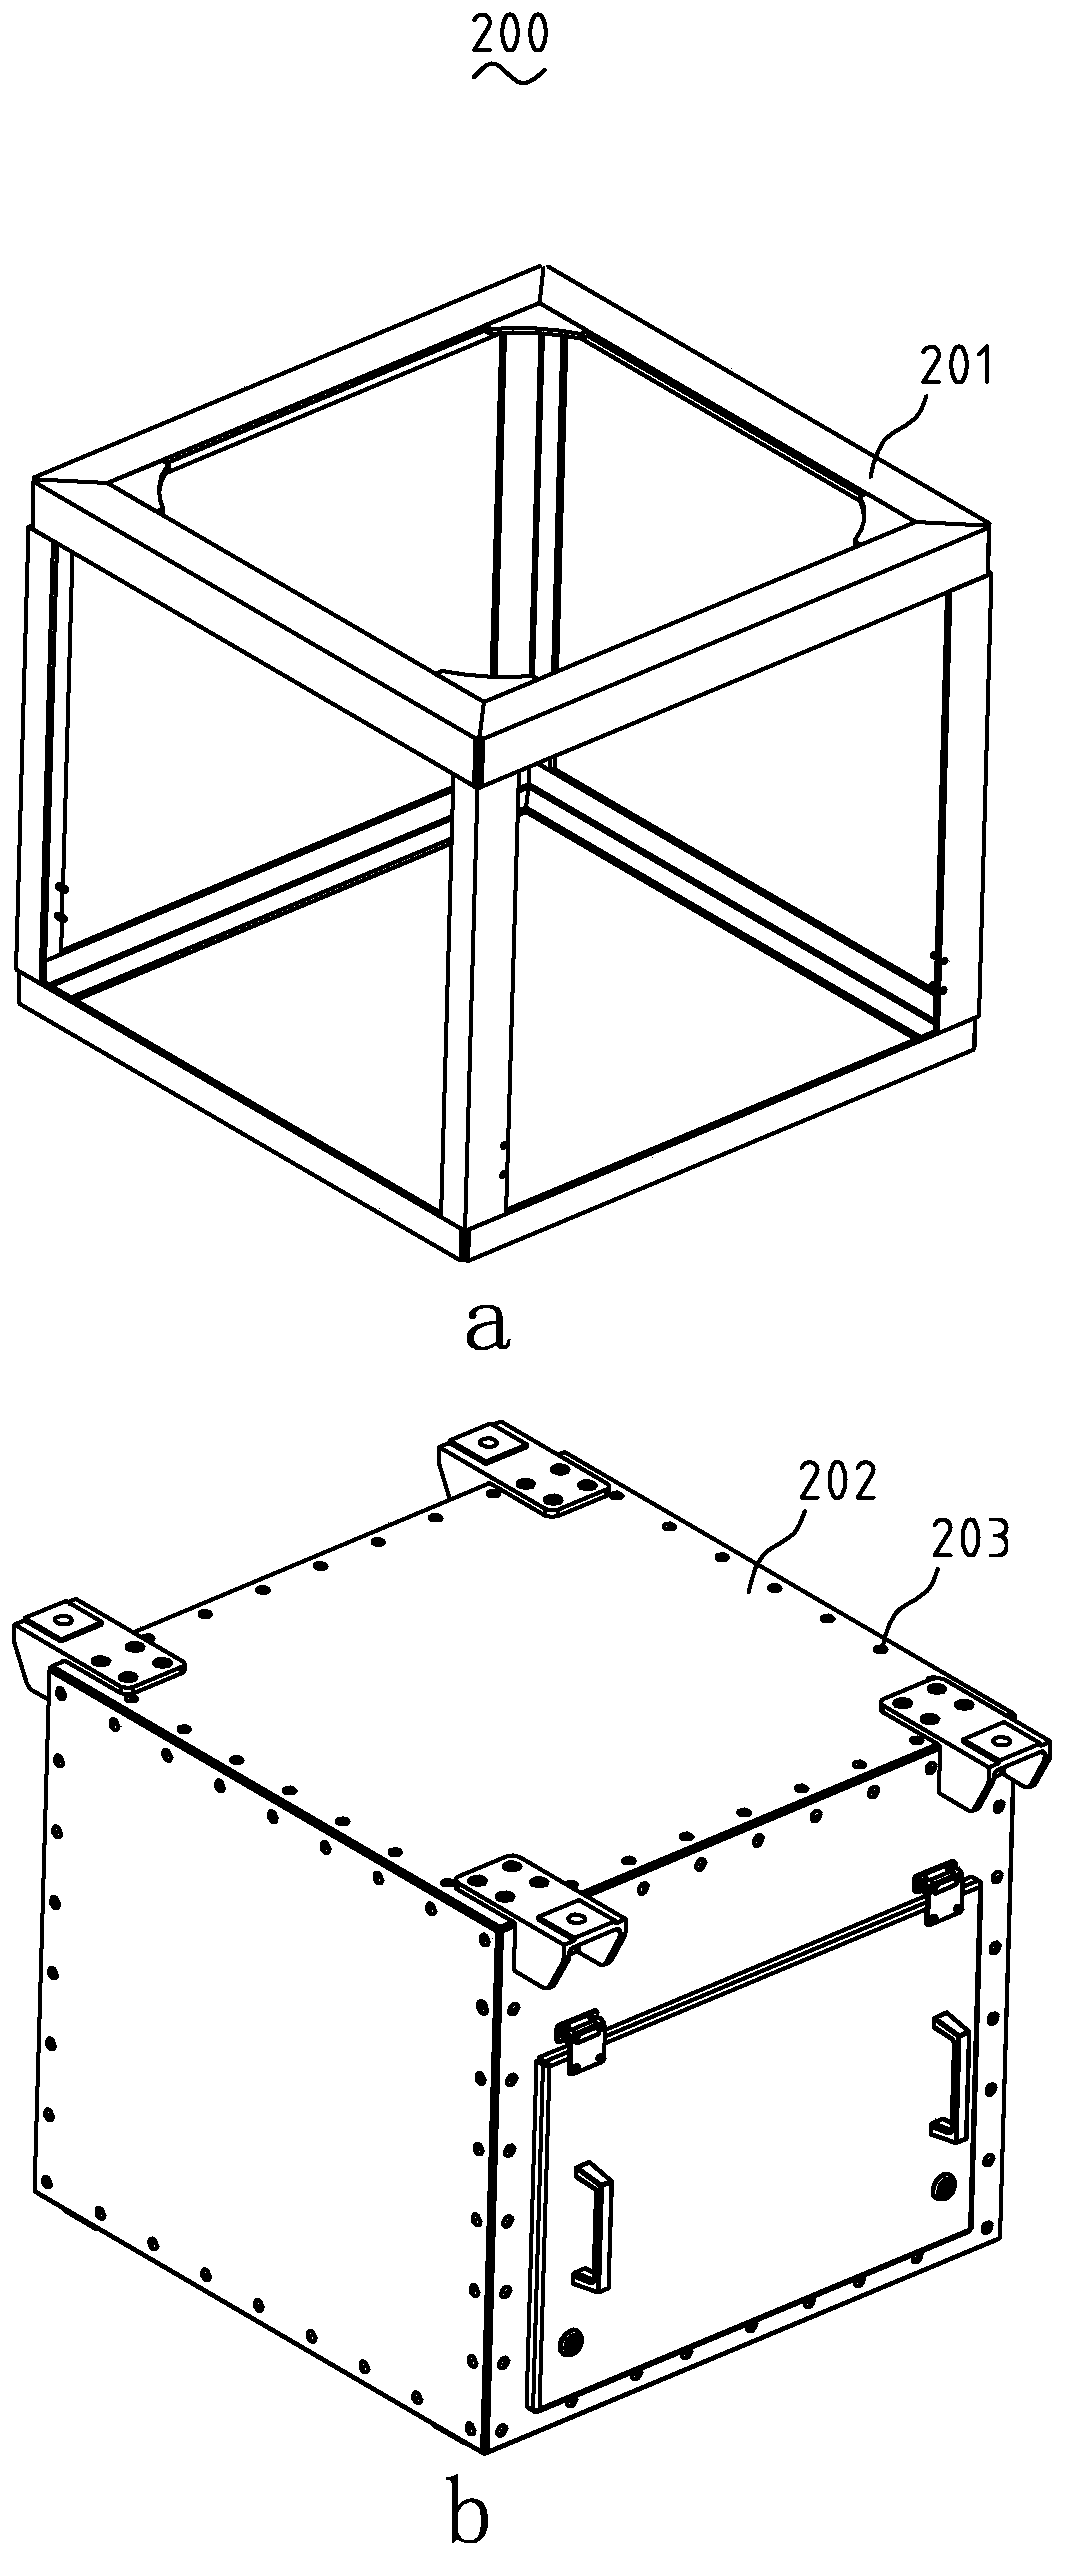 Box structure based on riveting